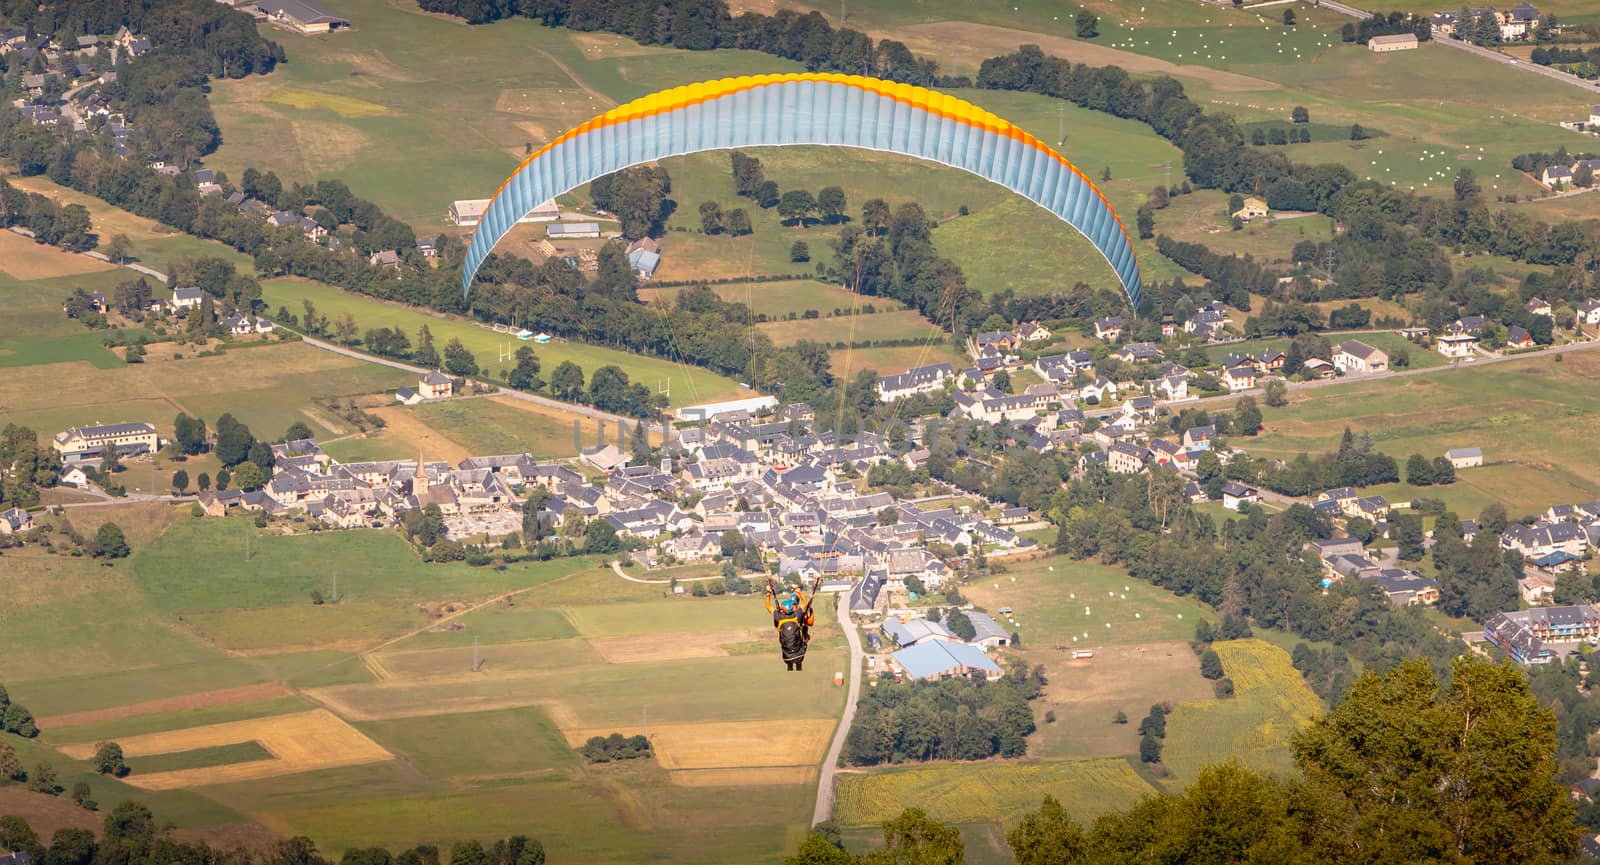 paragliding in flight at the top of the mountain at 1700 meters  by AtlanticEUROSTOXX